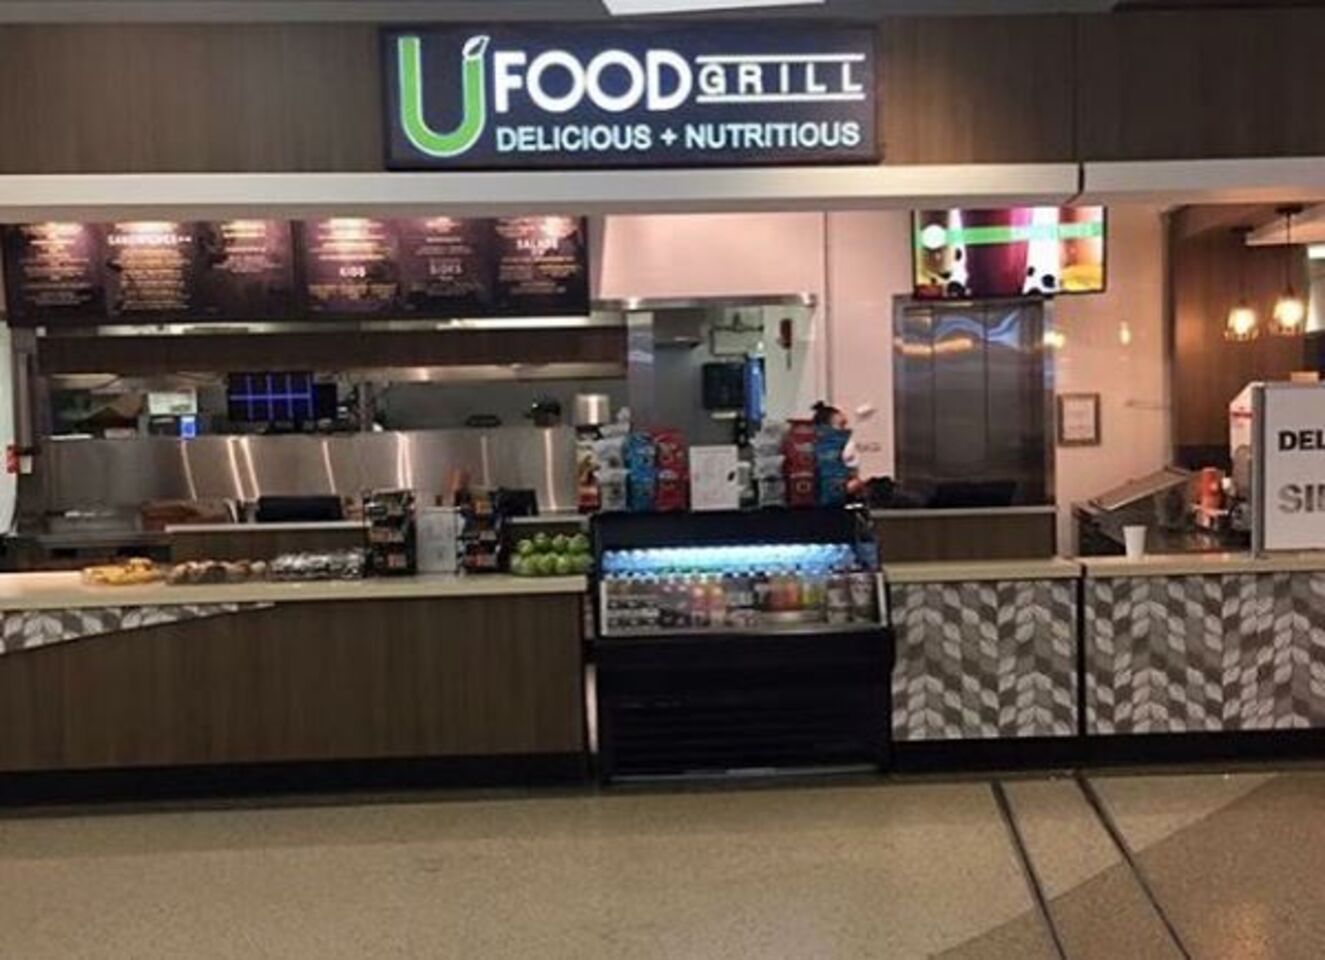 A photo of UFood Grill